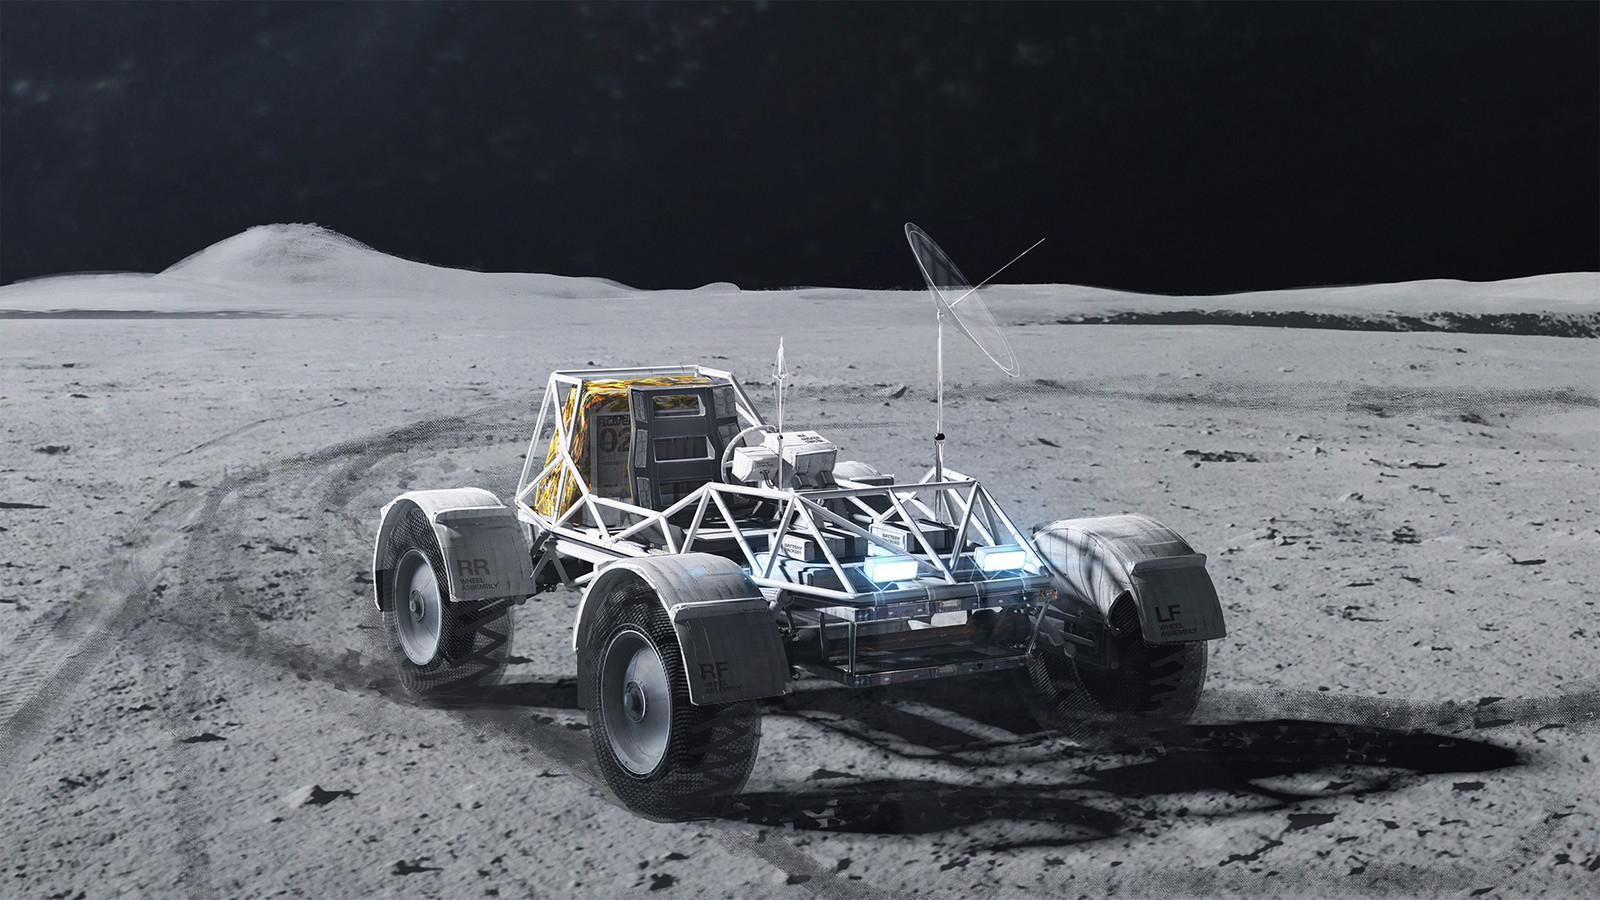 Final design of the rover.